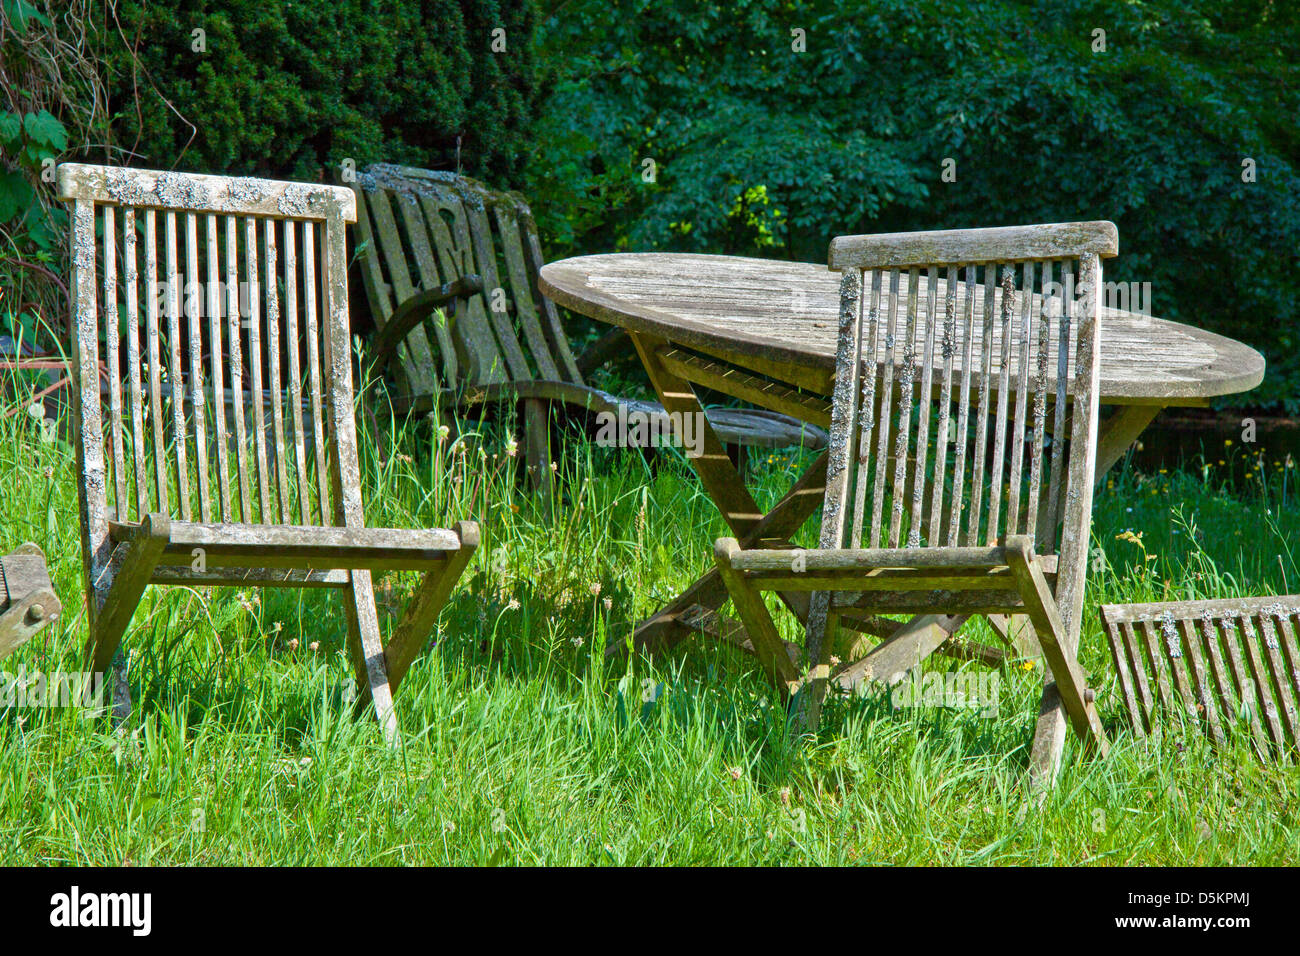 Deserted garden with old wooden table and chairs on grass Stock Photo